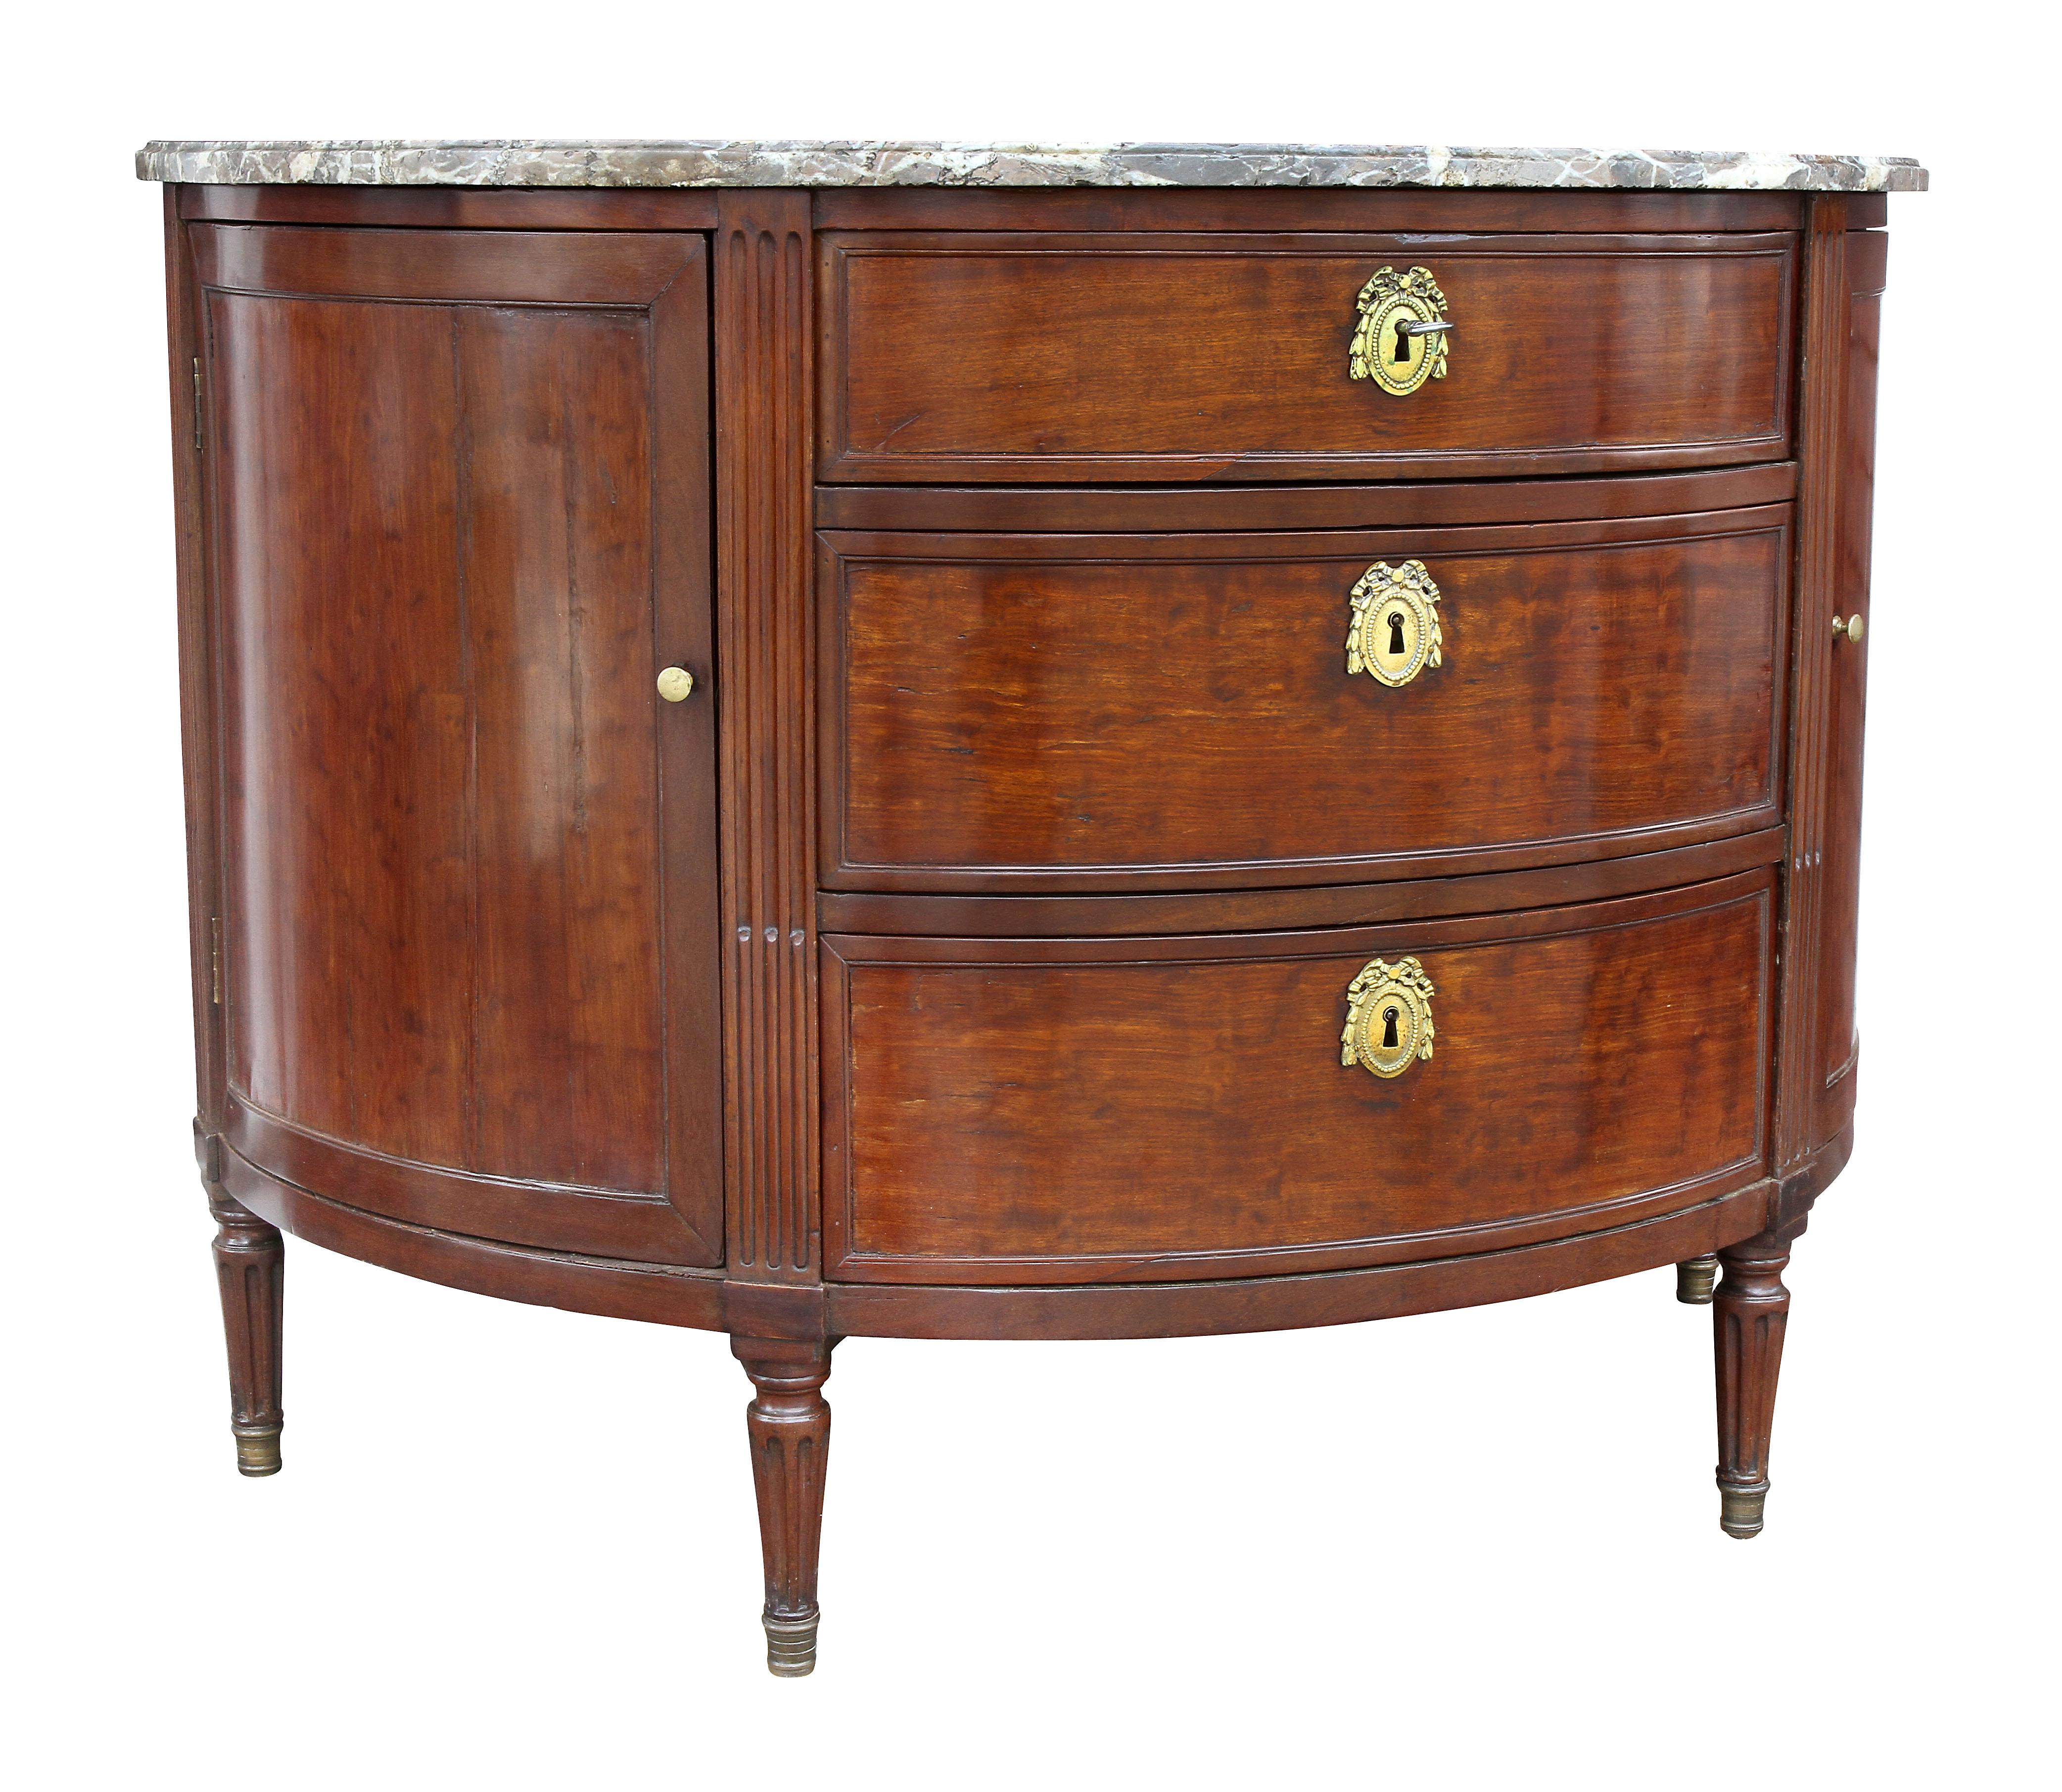 With D-shaped marble top over three graduated drawers flanked by stop fluting and paneled doors, raised on circular fluted tapered legs with sabot feet. Provenance; Estate of William Hodgins, noted interior designer from Boston.